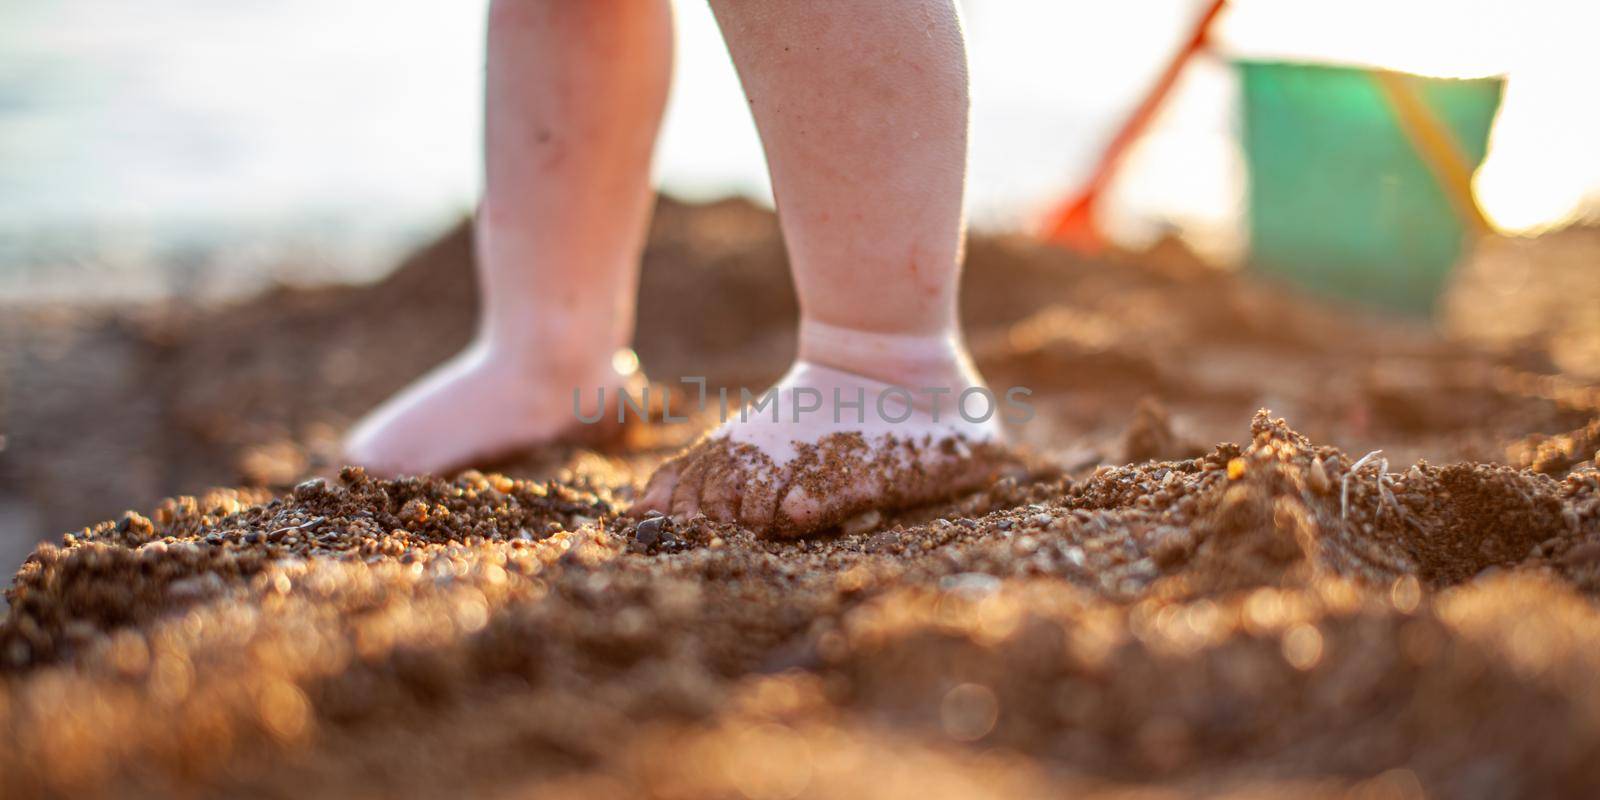 Children's bare feet in summer on a golden sandy beach close-up. The concept of child safety. The concept of recreation with children.